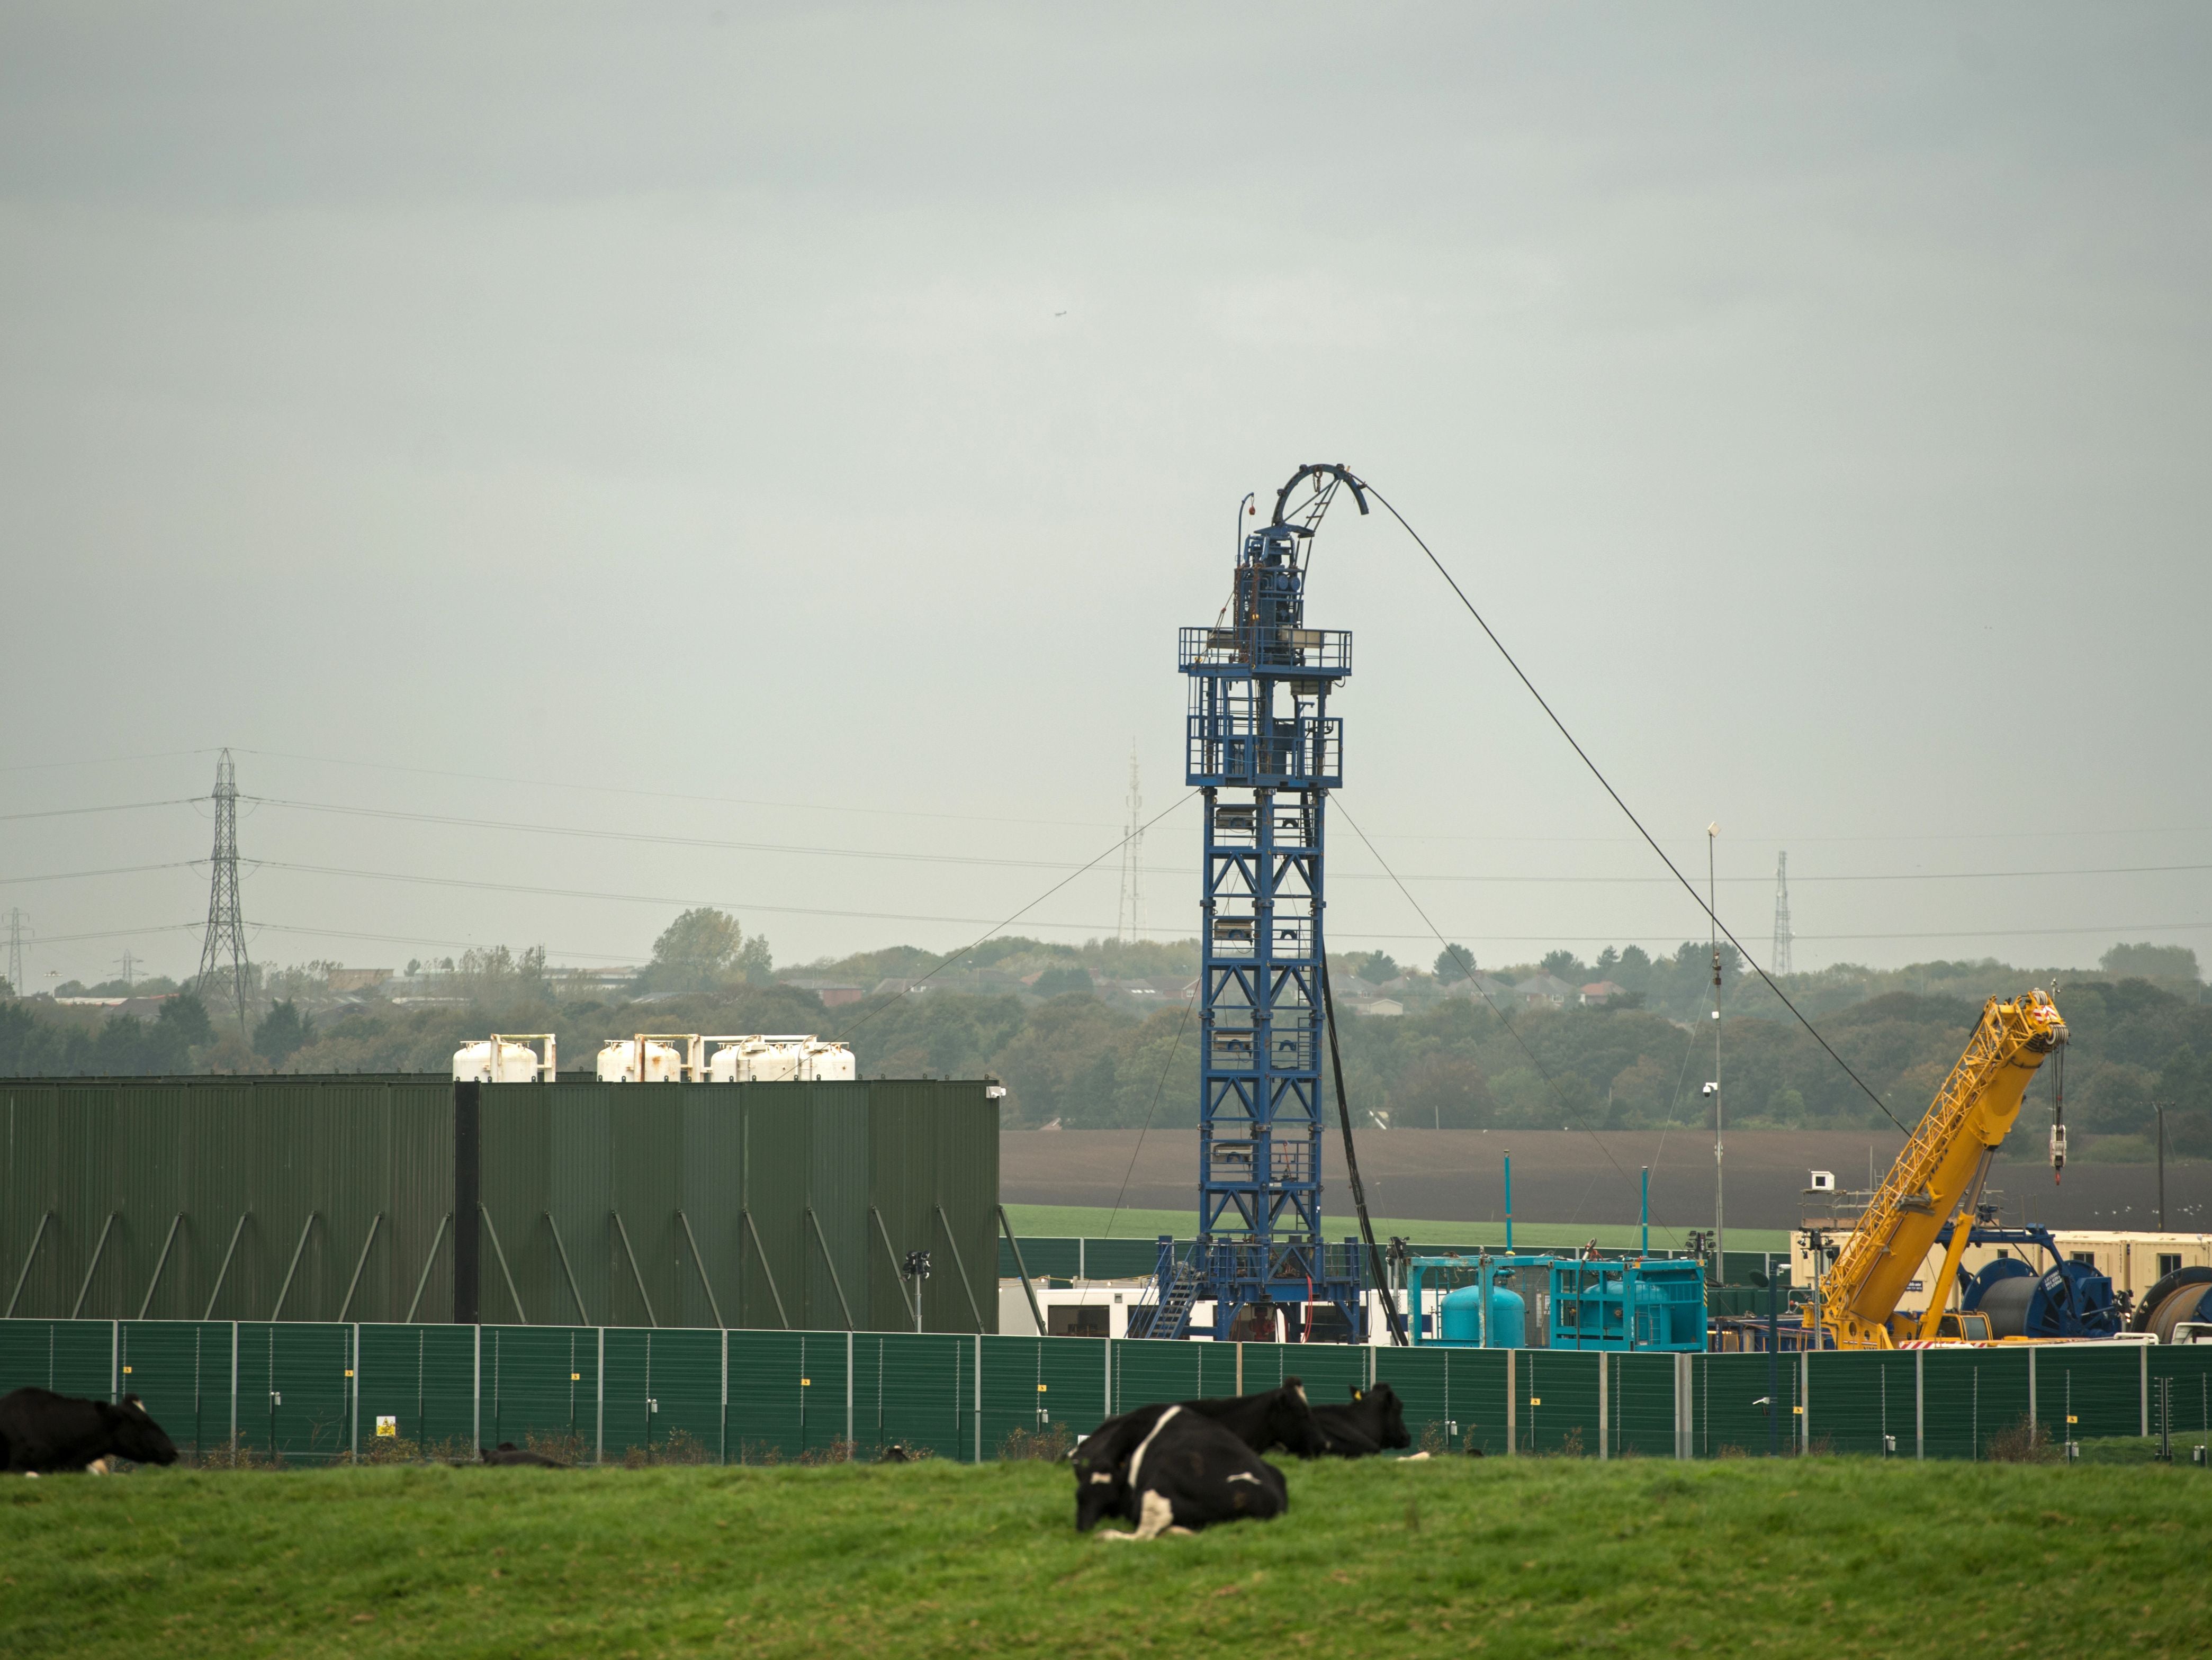 A regulator has ordered wells to be sealed up at a Lancashire fracking site